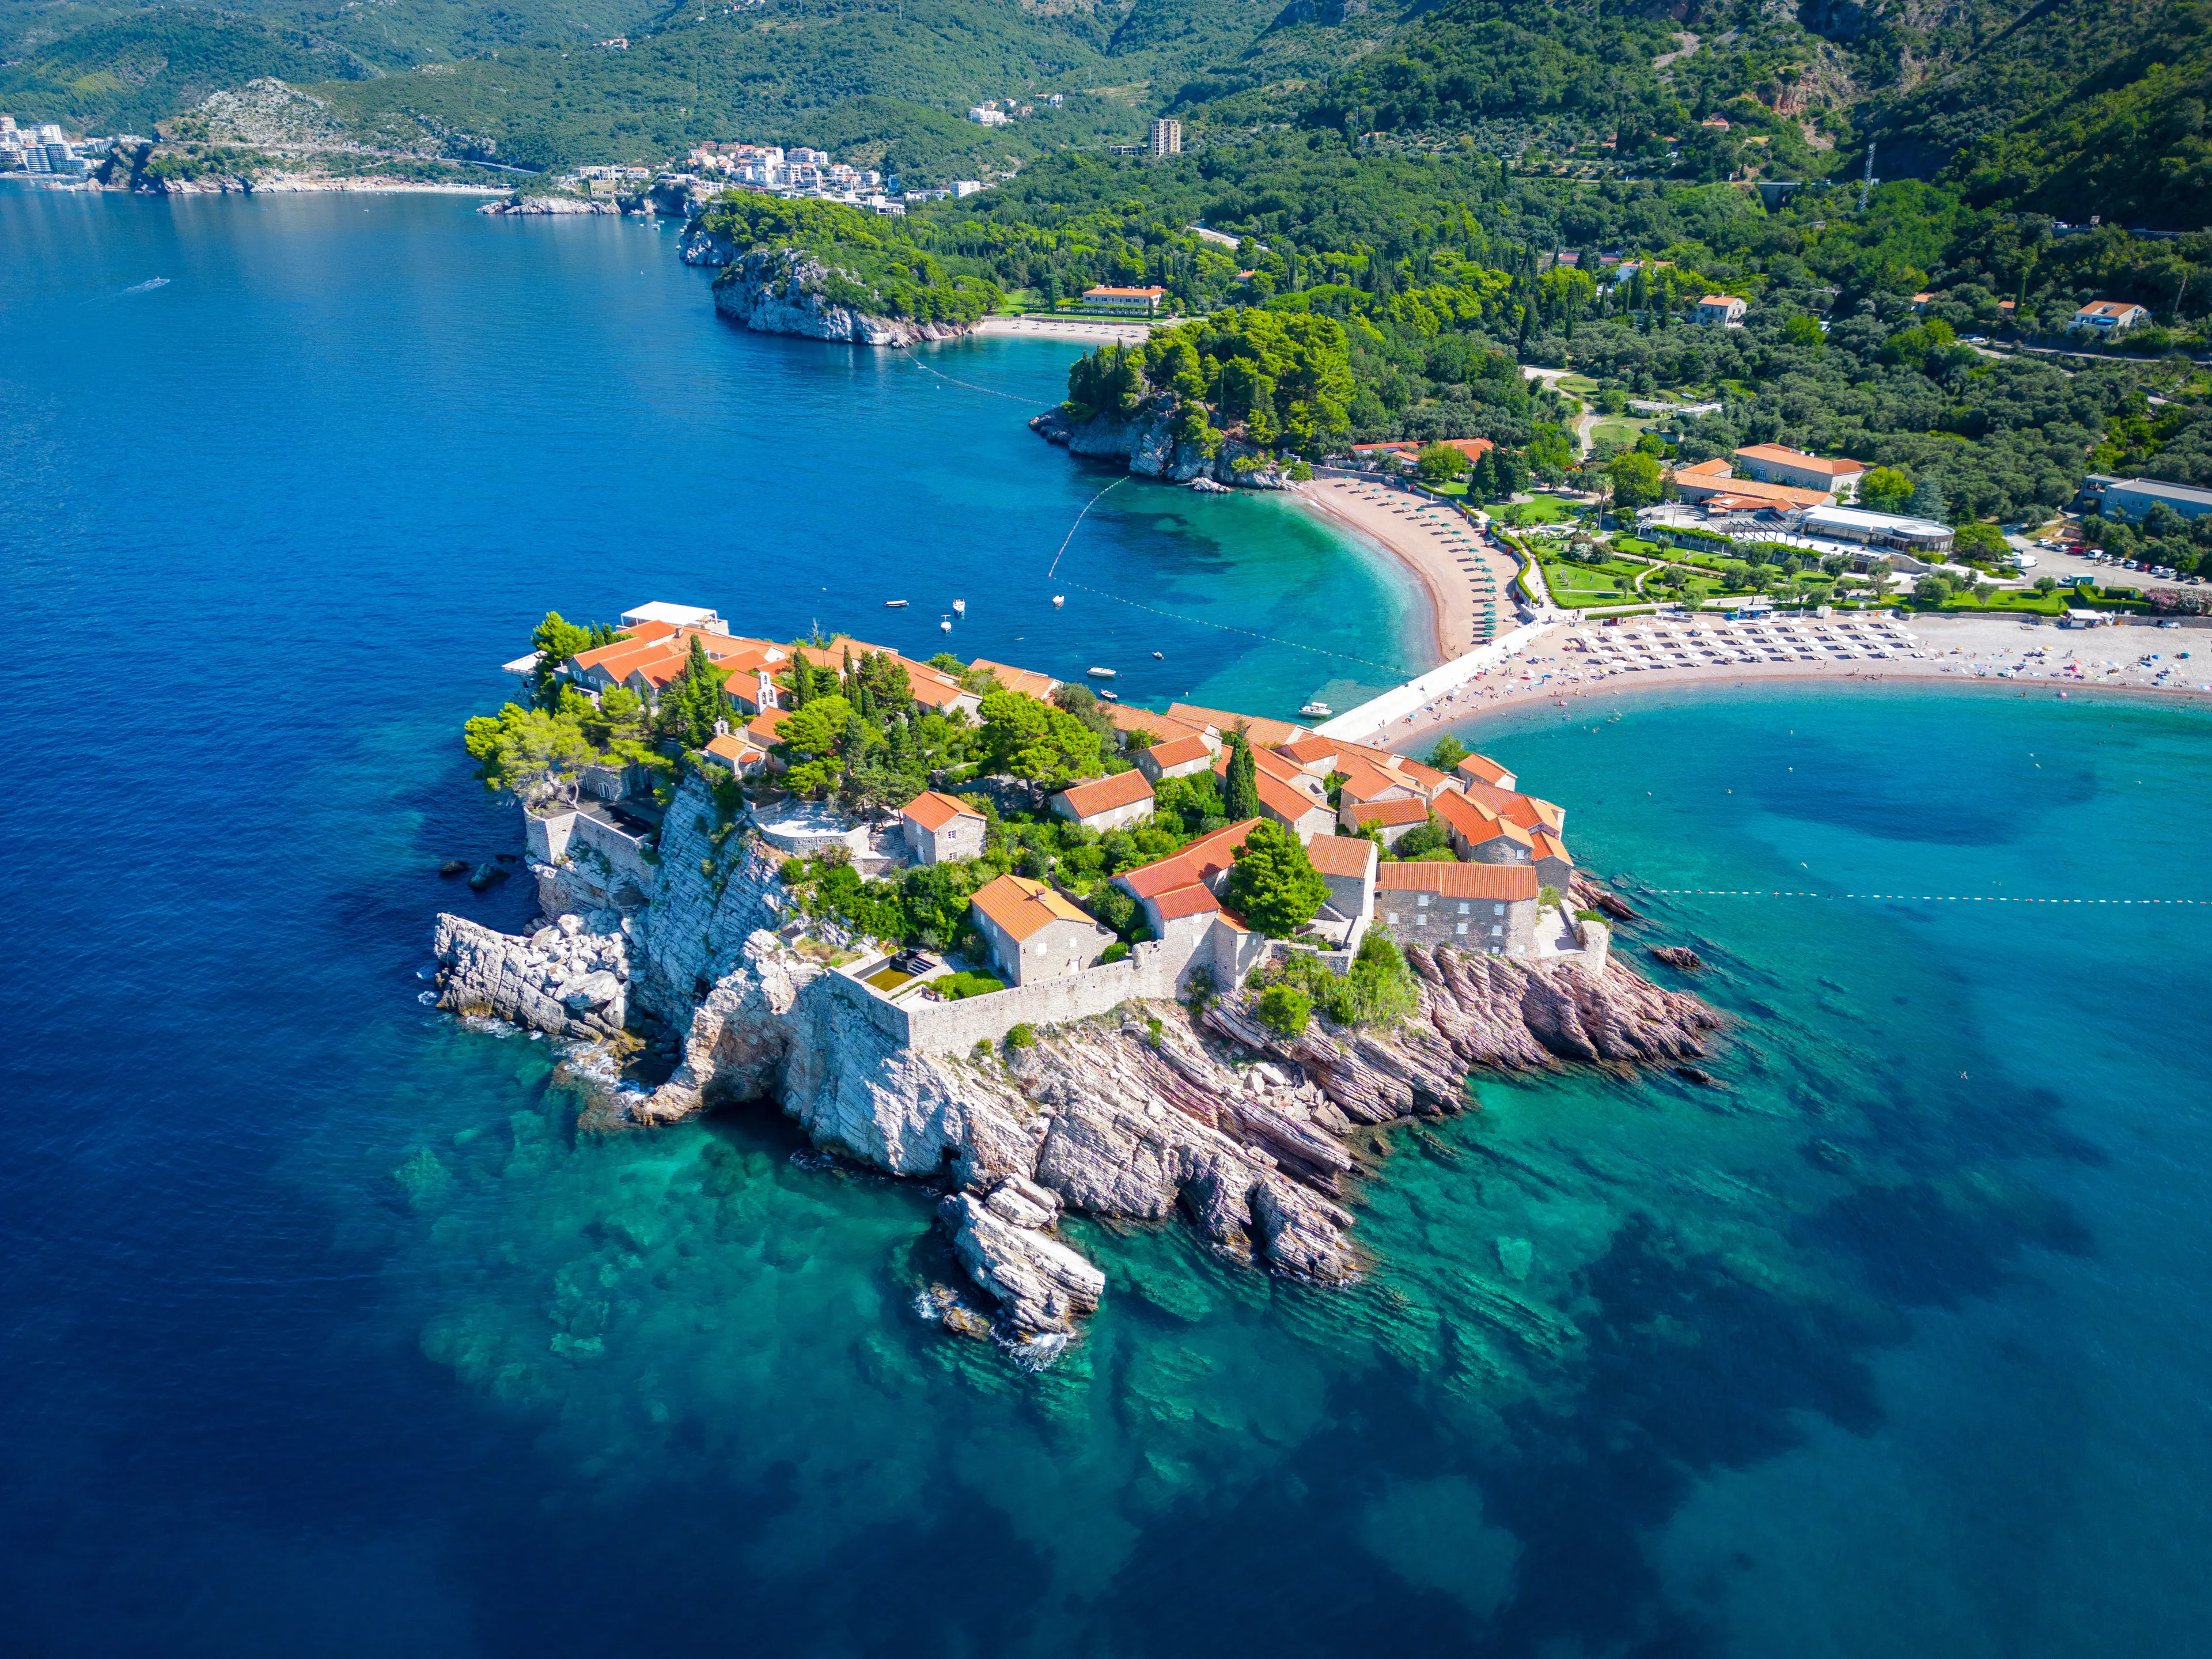 4-Day Budva Adventure: Nightlife and Outdoor Fun with Friends